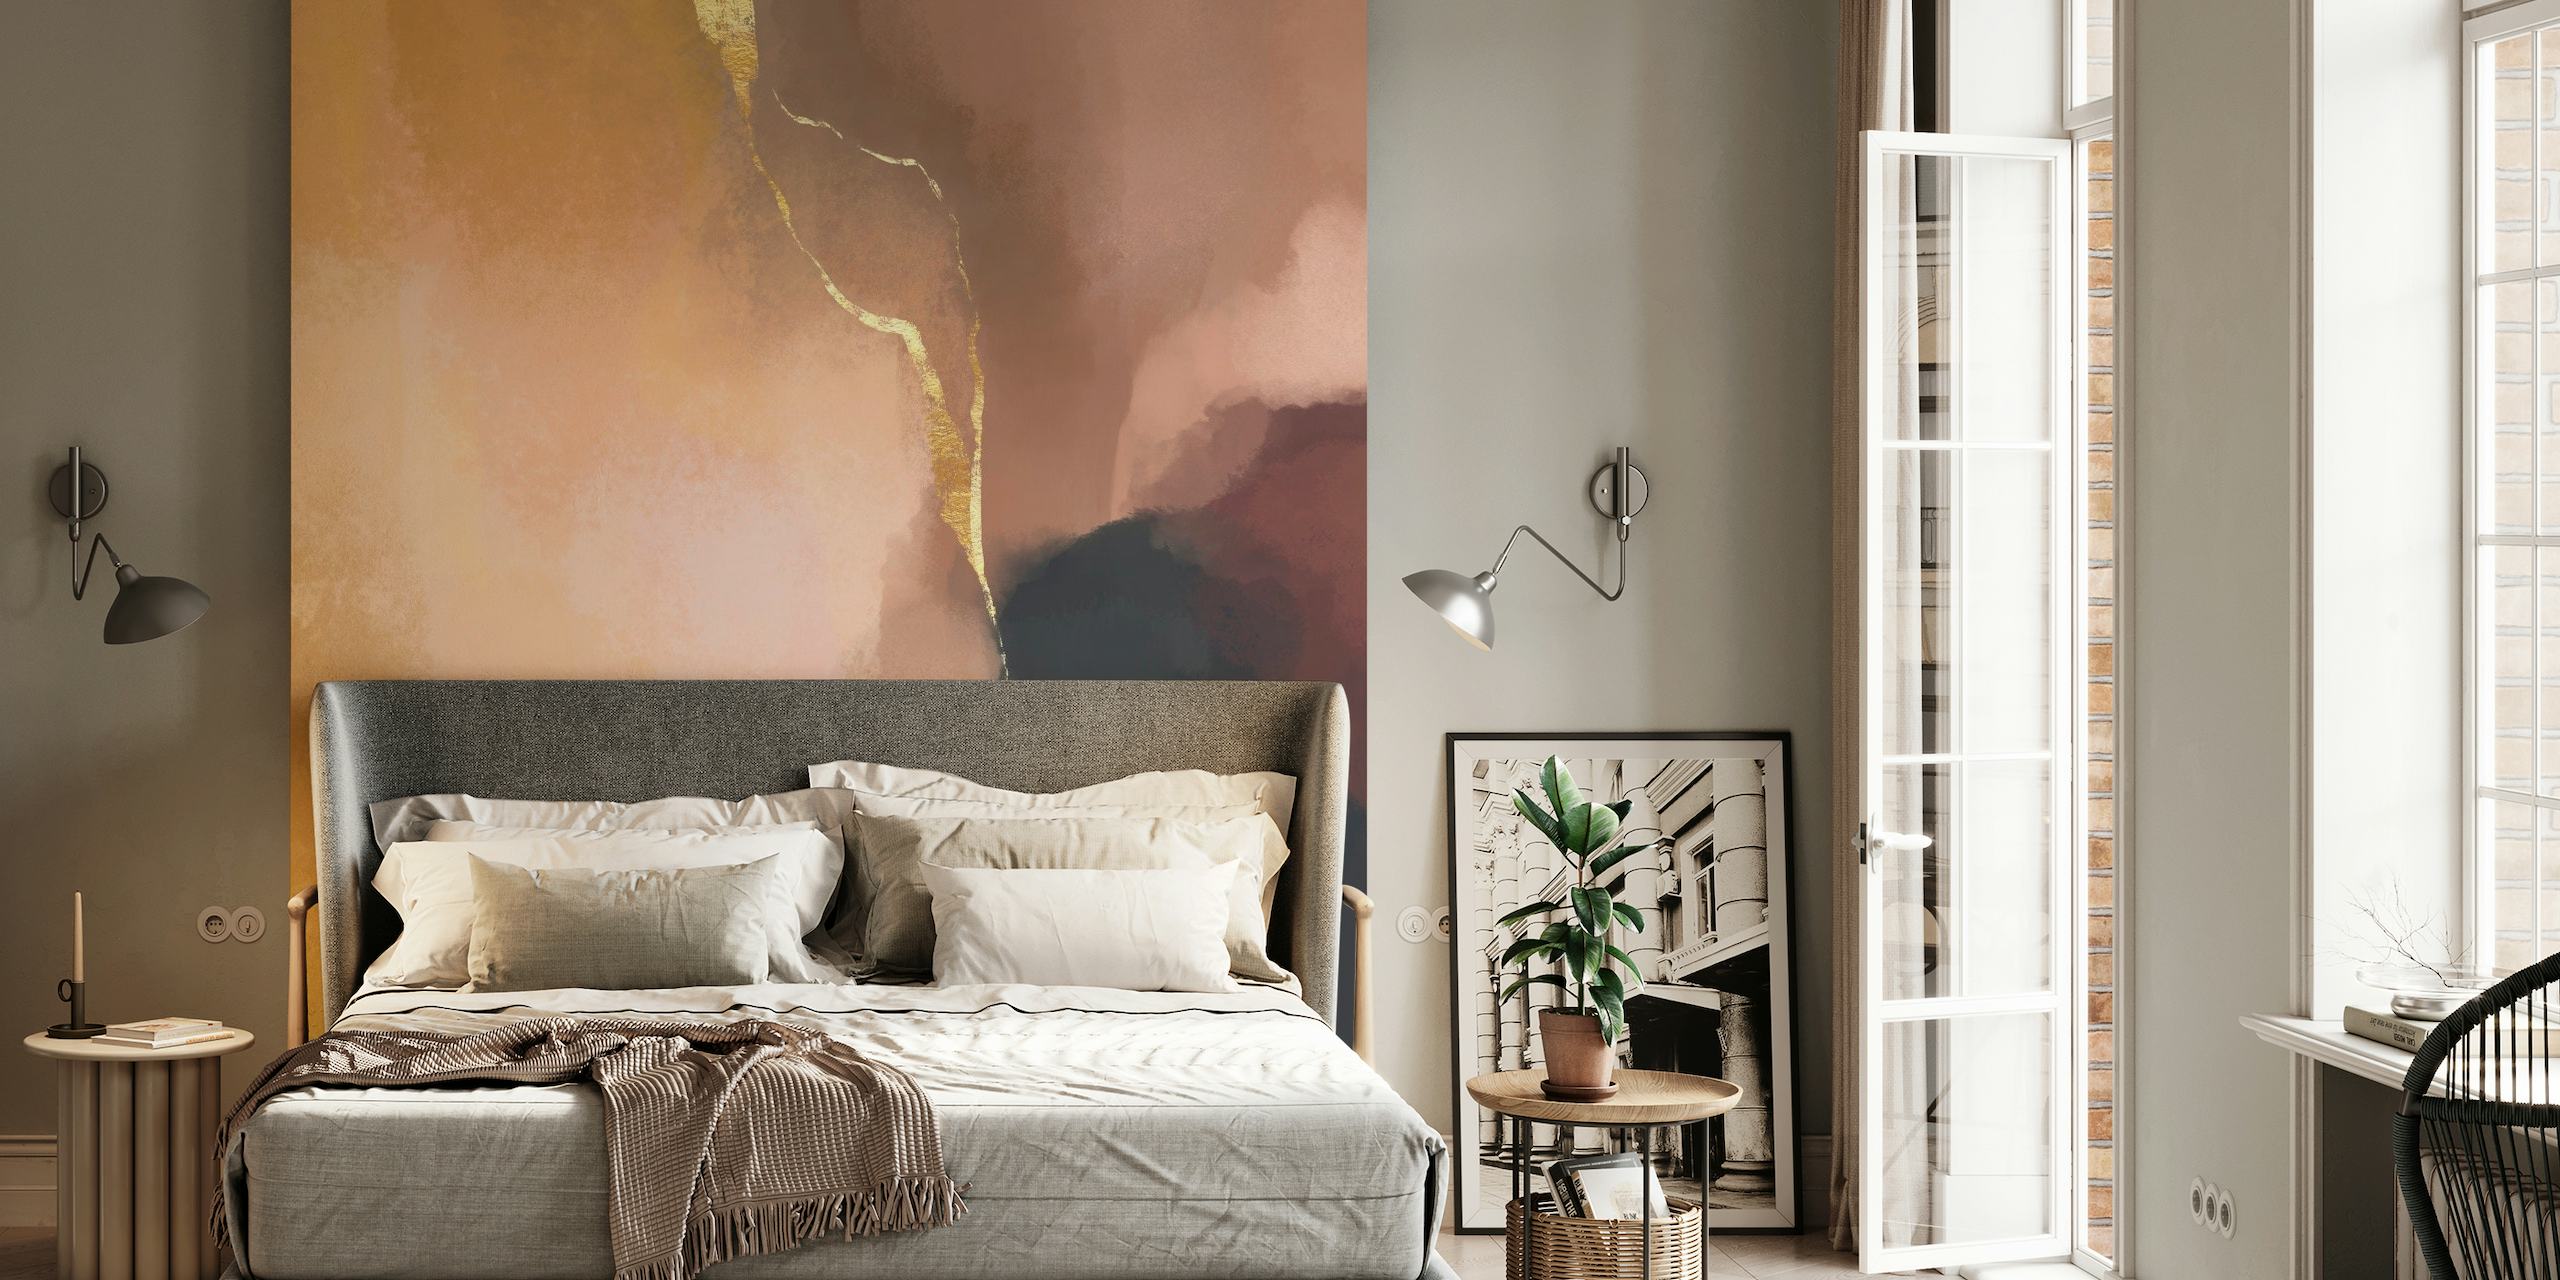 Abstract 'Stay Calm' wall mural in amber, gold, and blush tones with charcoal accents